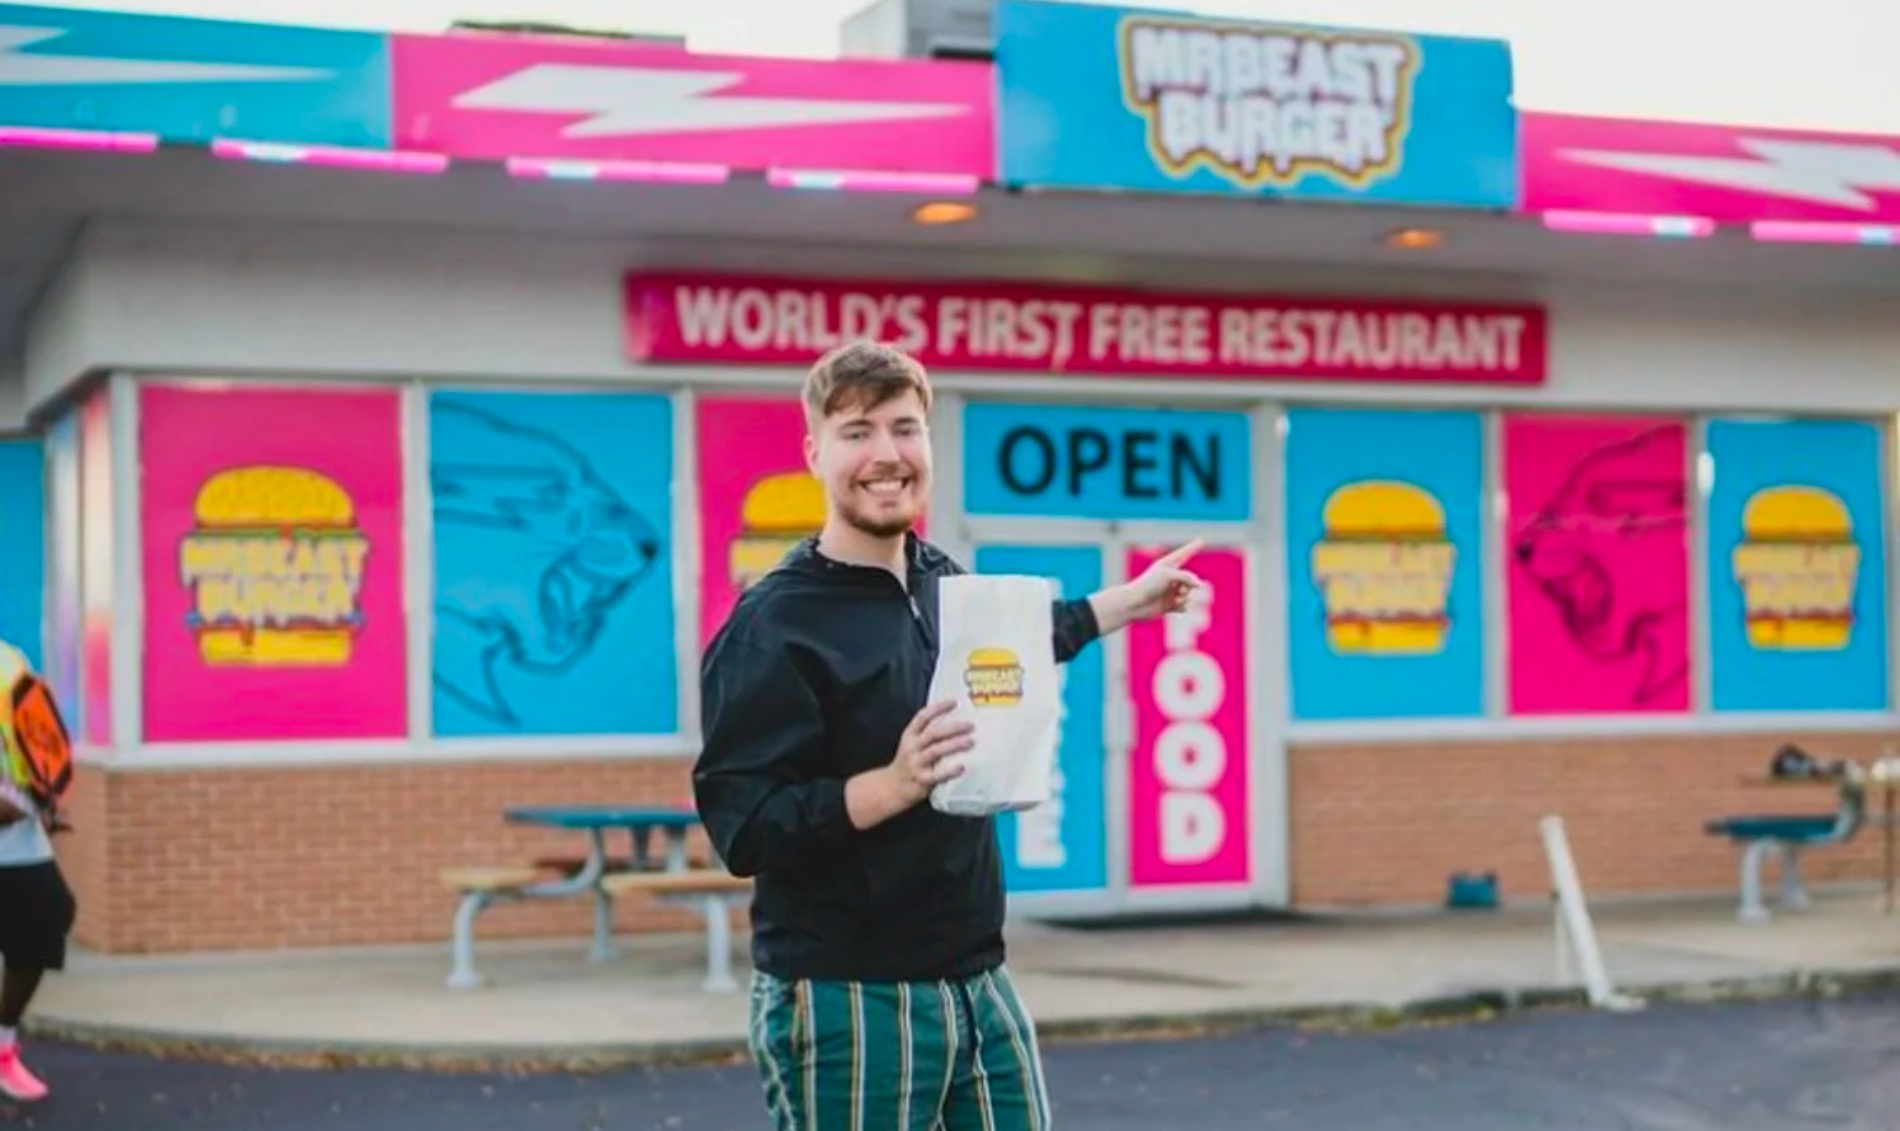 Mr. Beast Burgers In Dallas Is Booming With New 'Virtual Dining' Concept -  Narcity